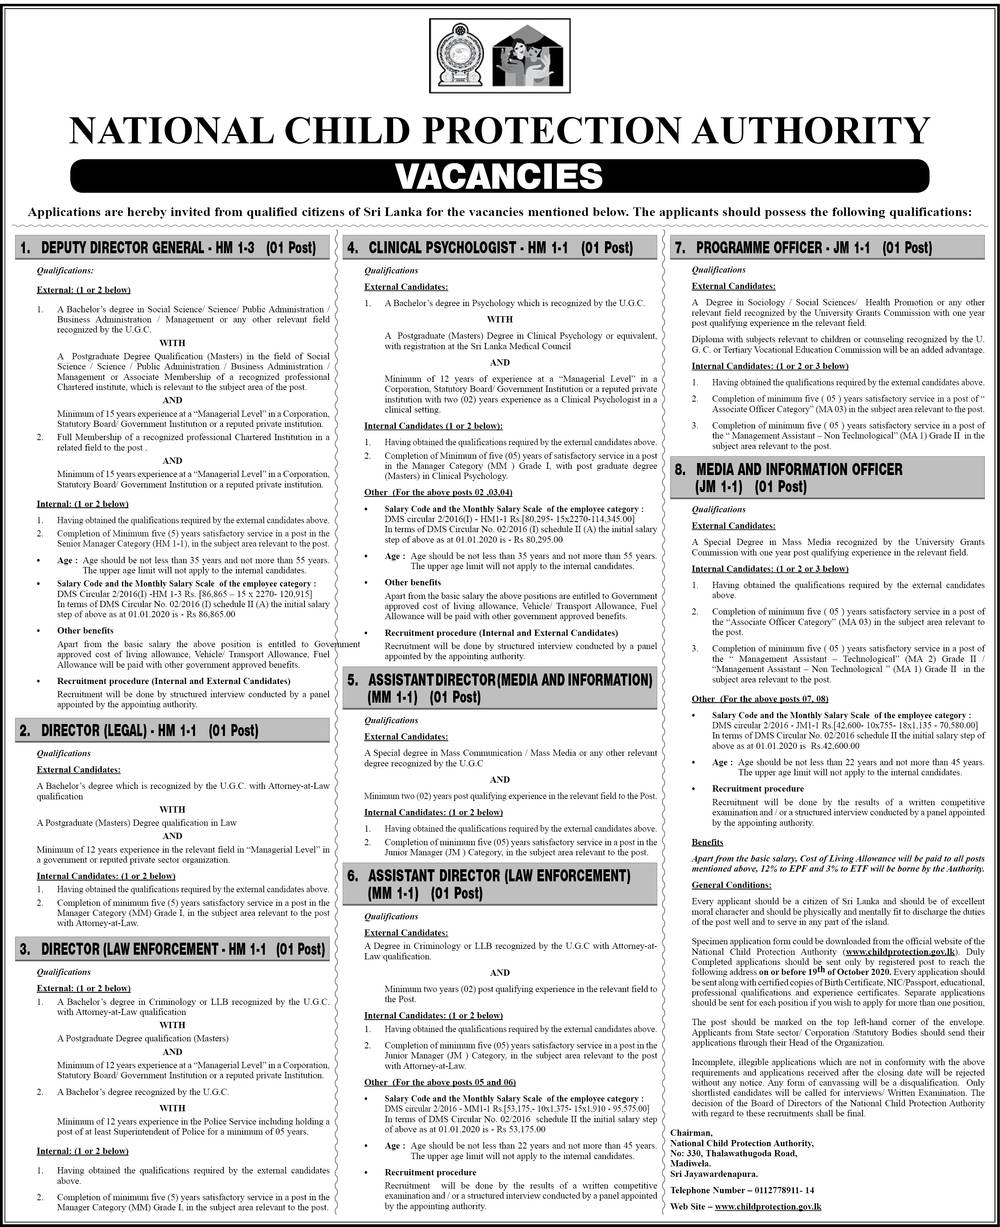 Deputy Director General, Director, Clinical Psychologist, Assistant Director, Programme Officer, Media and Enforcement Officer – National Child Protection Authority